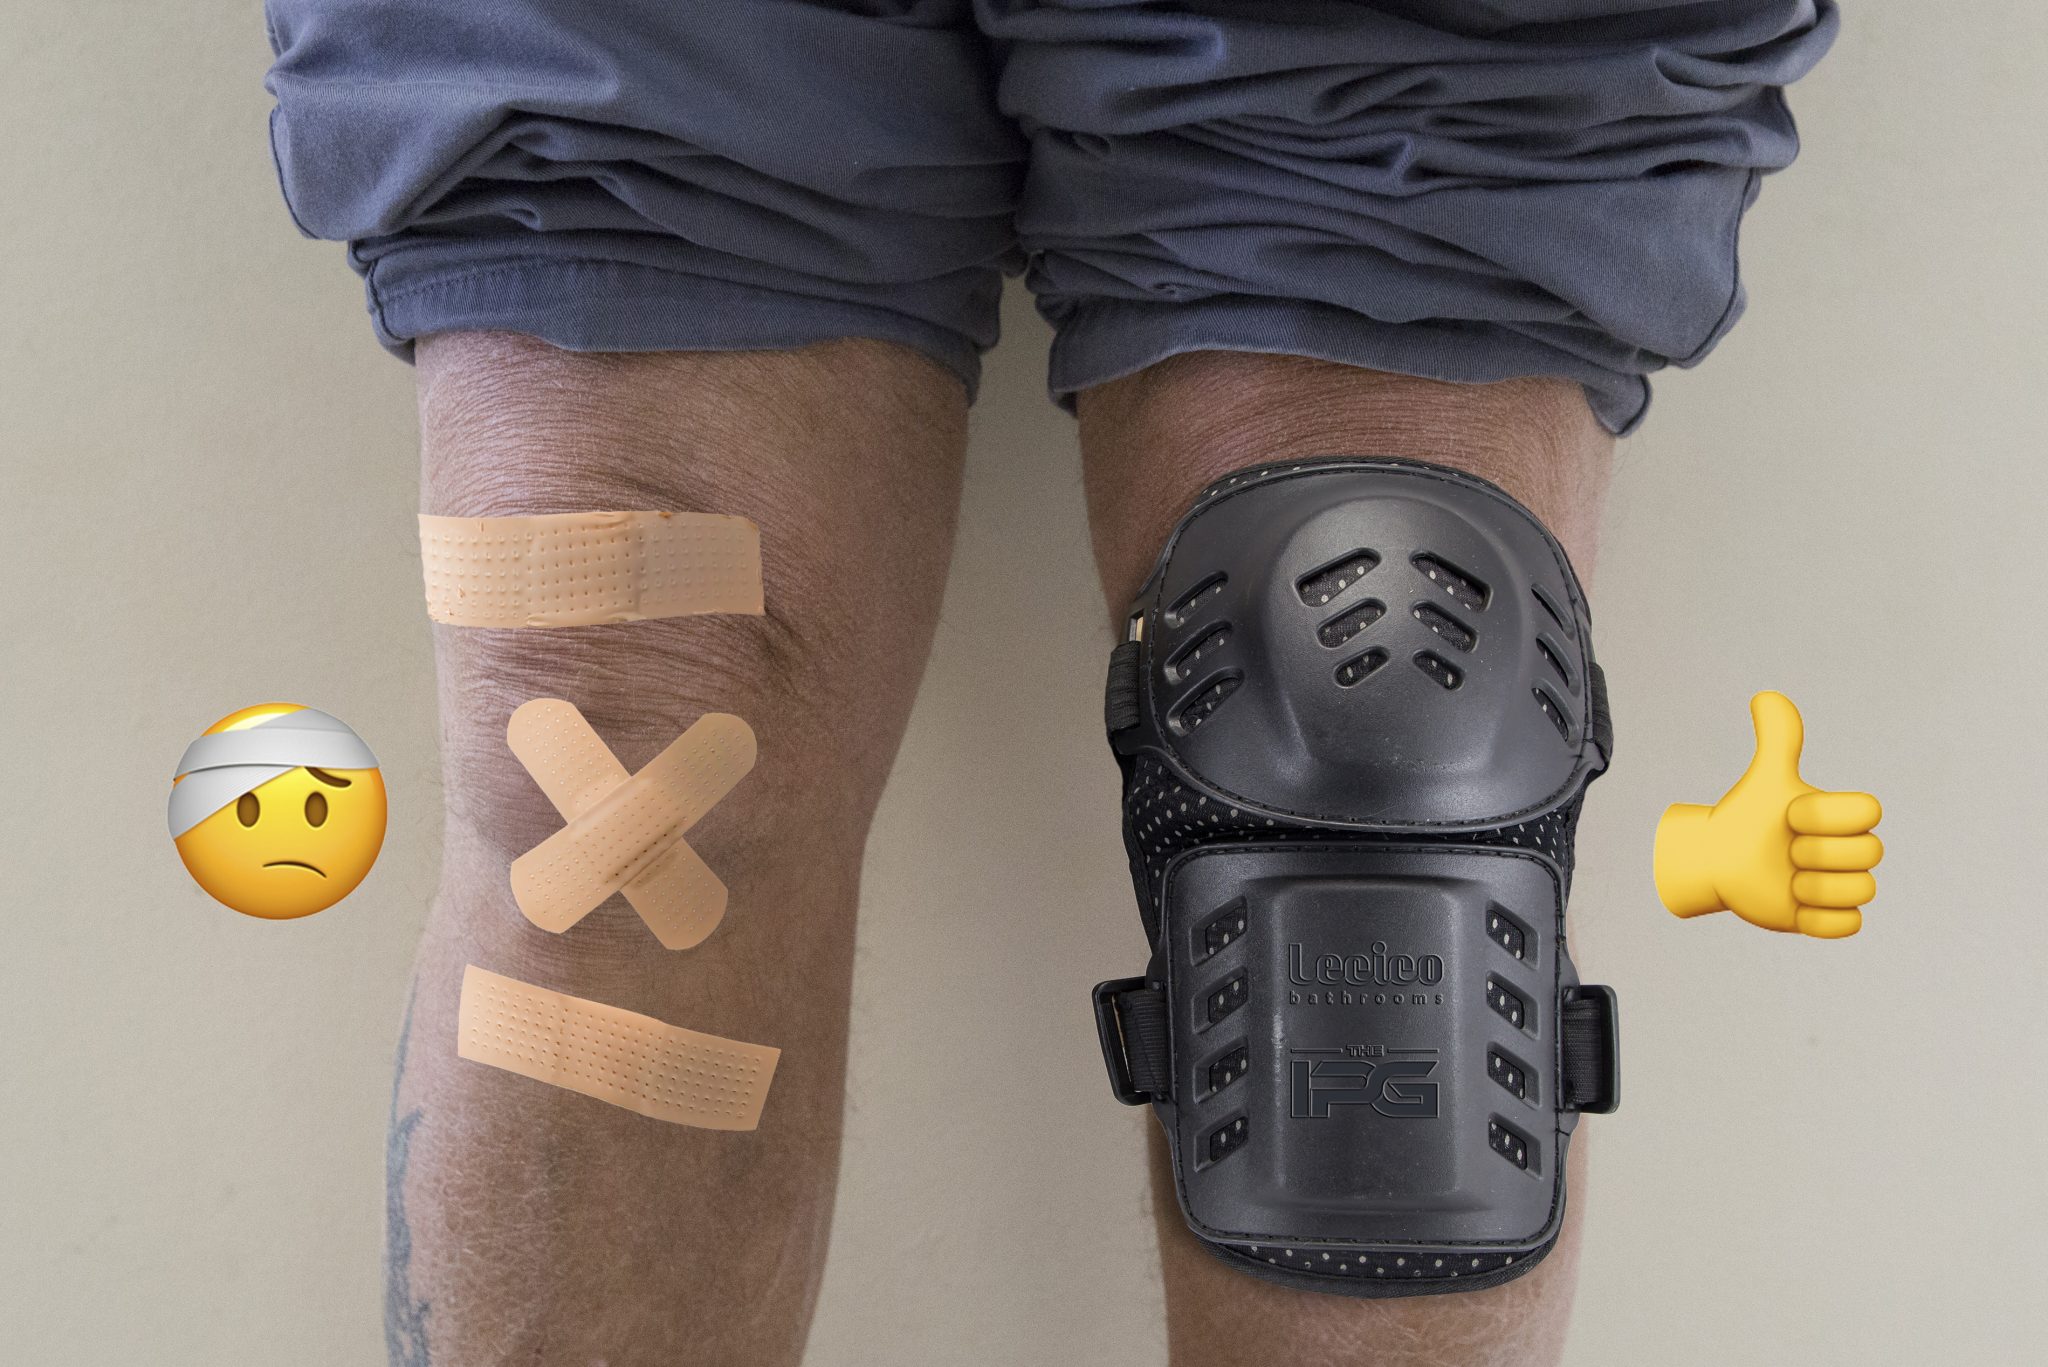 The IPG to give away 25 knee pads to help battle ‘The Problem of Plumber’s Knees’ @ipg_the